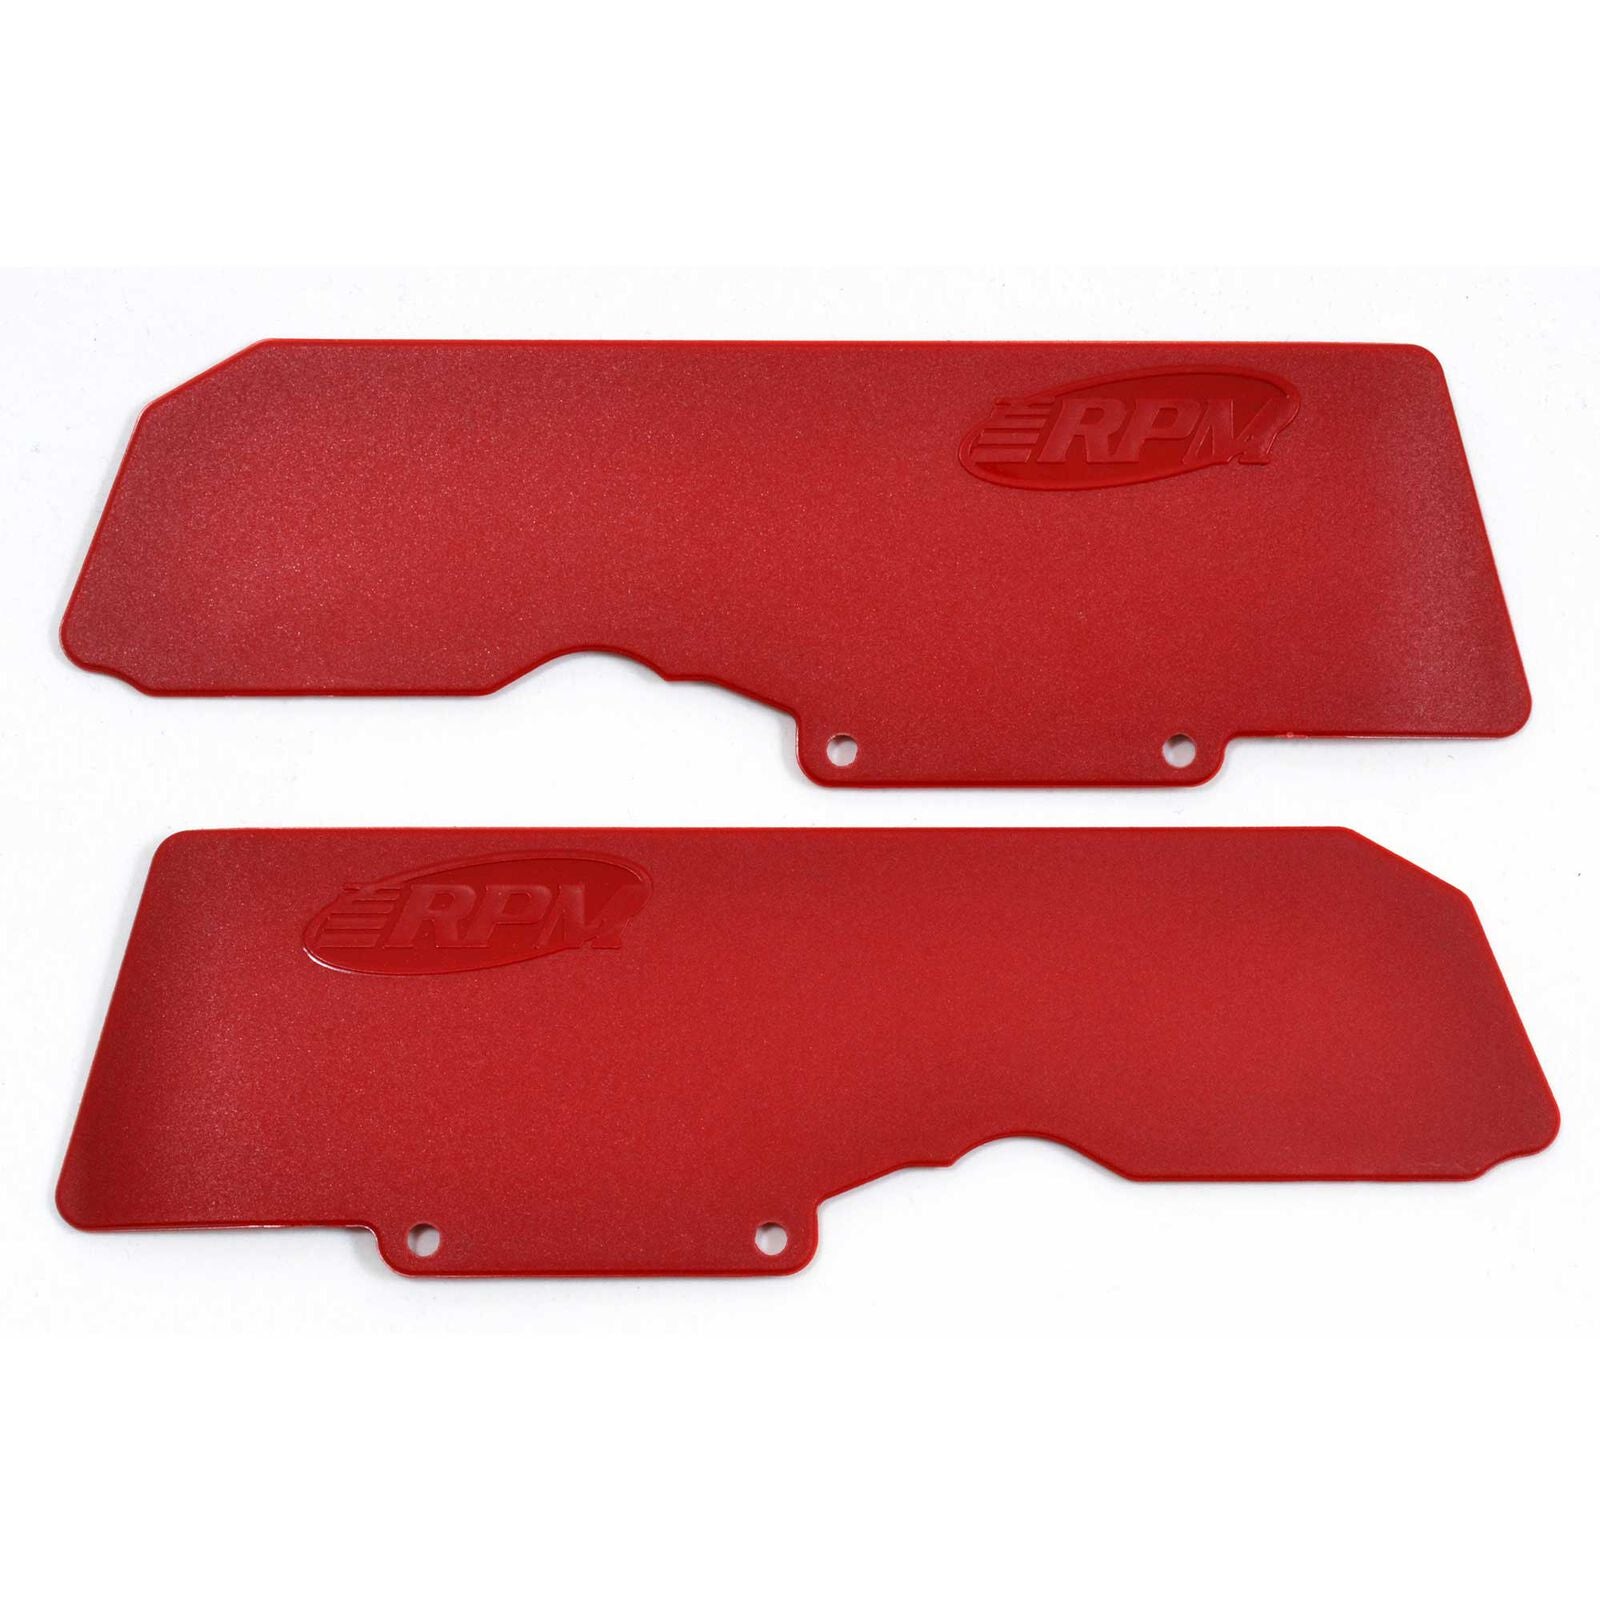 RPM 81539 RPM Mud Guards for Rear A-arms (2): Red